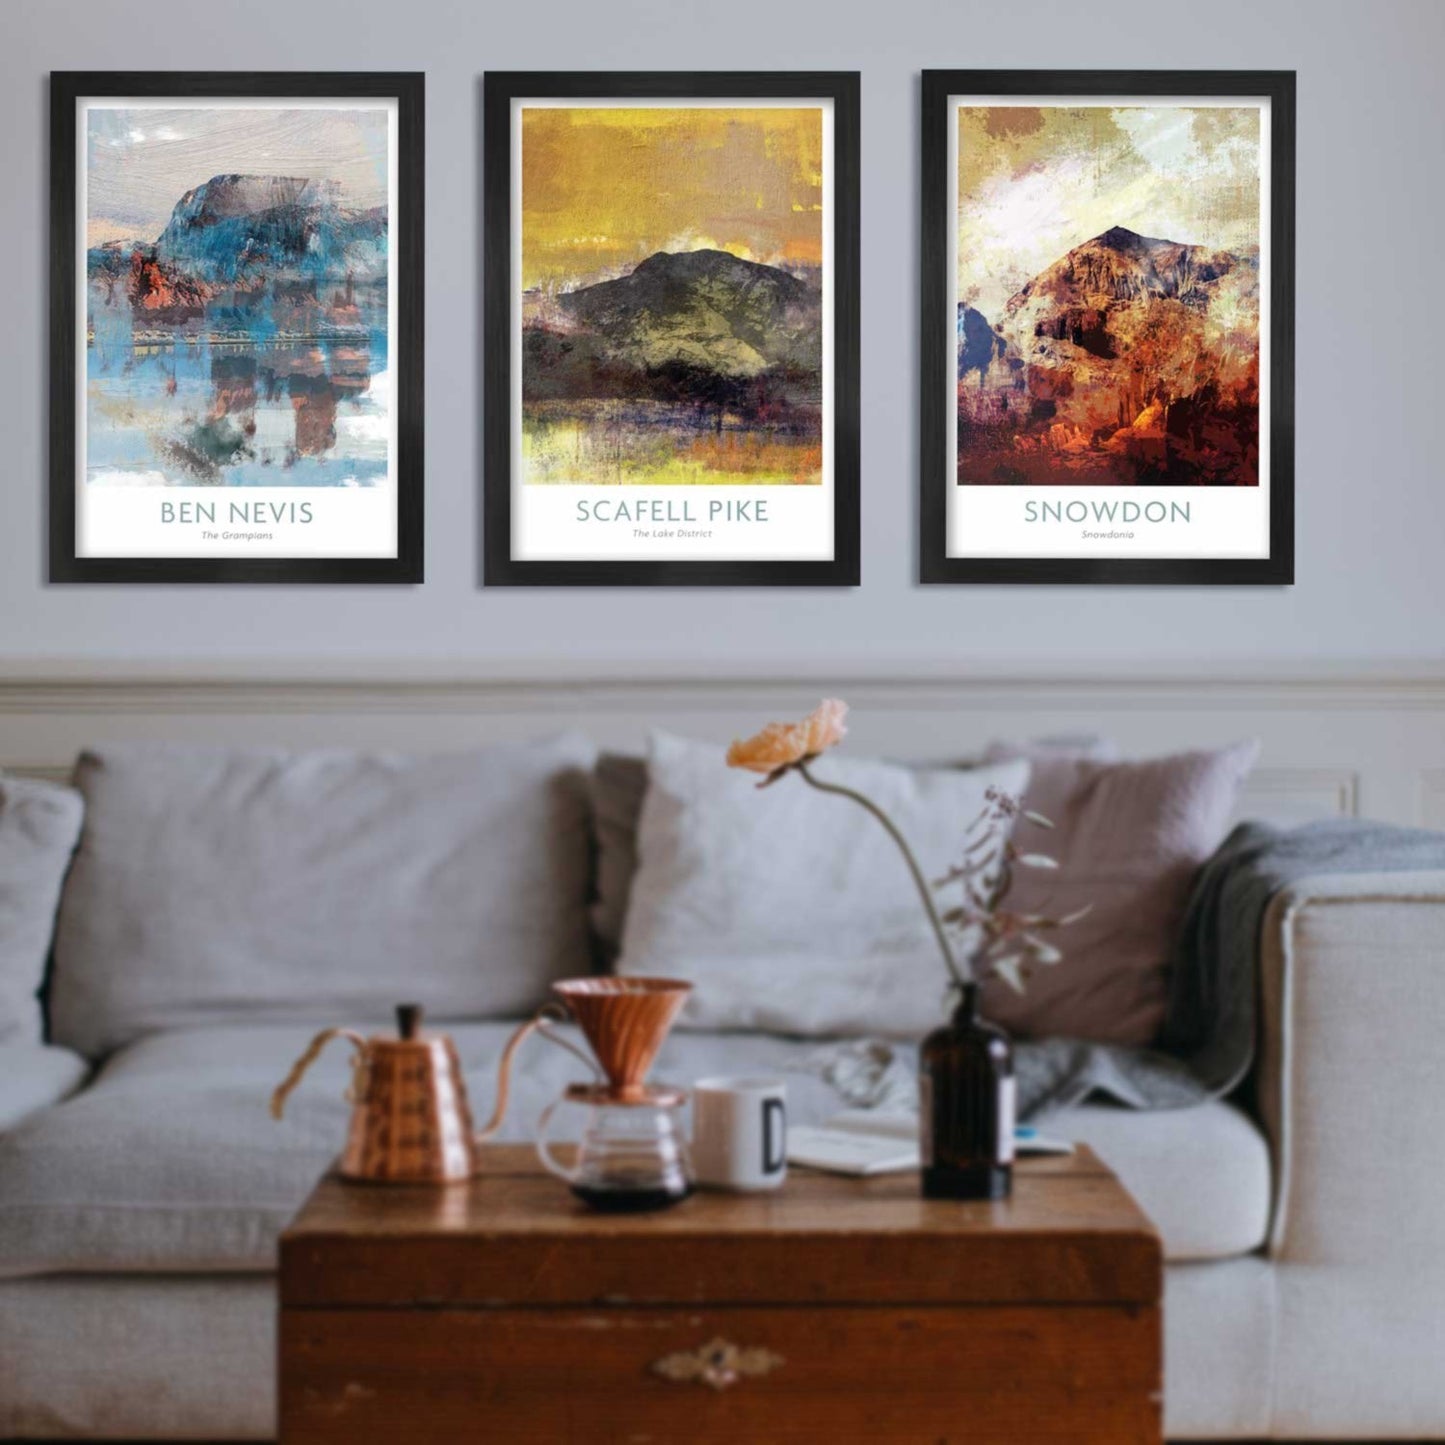 3 Peaks Posters. Scafell Pike, Snowdon and Ben Nevis